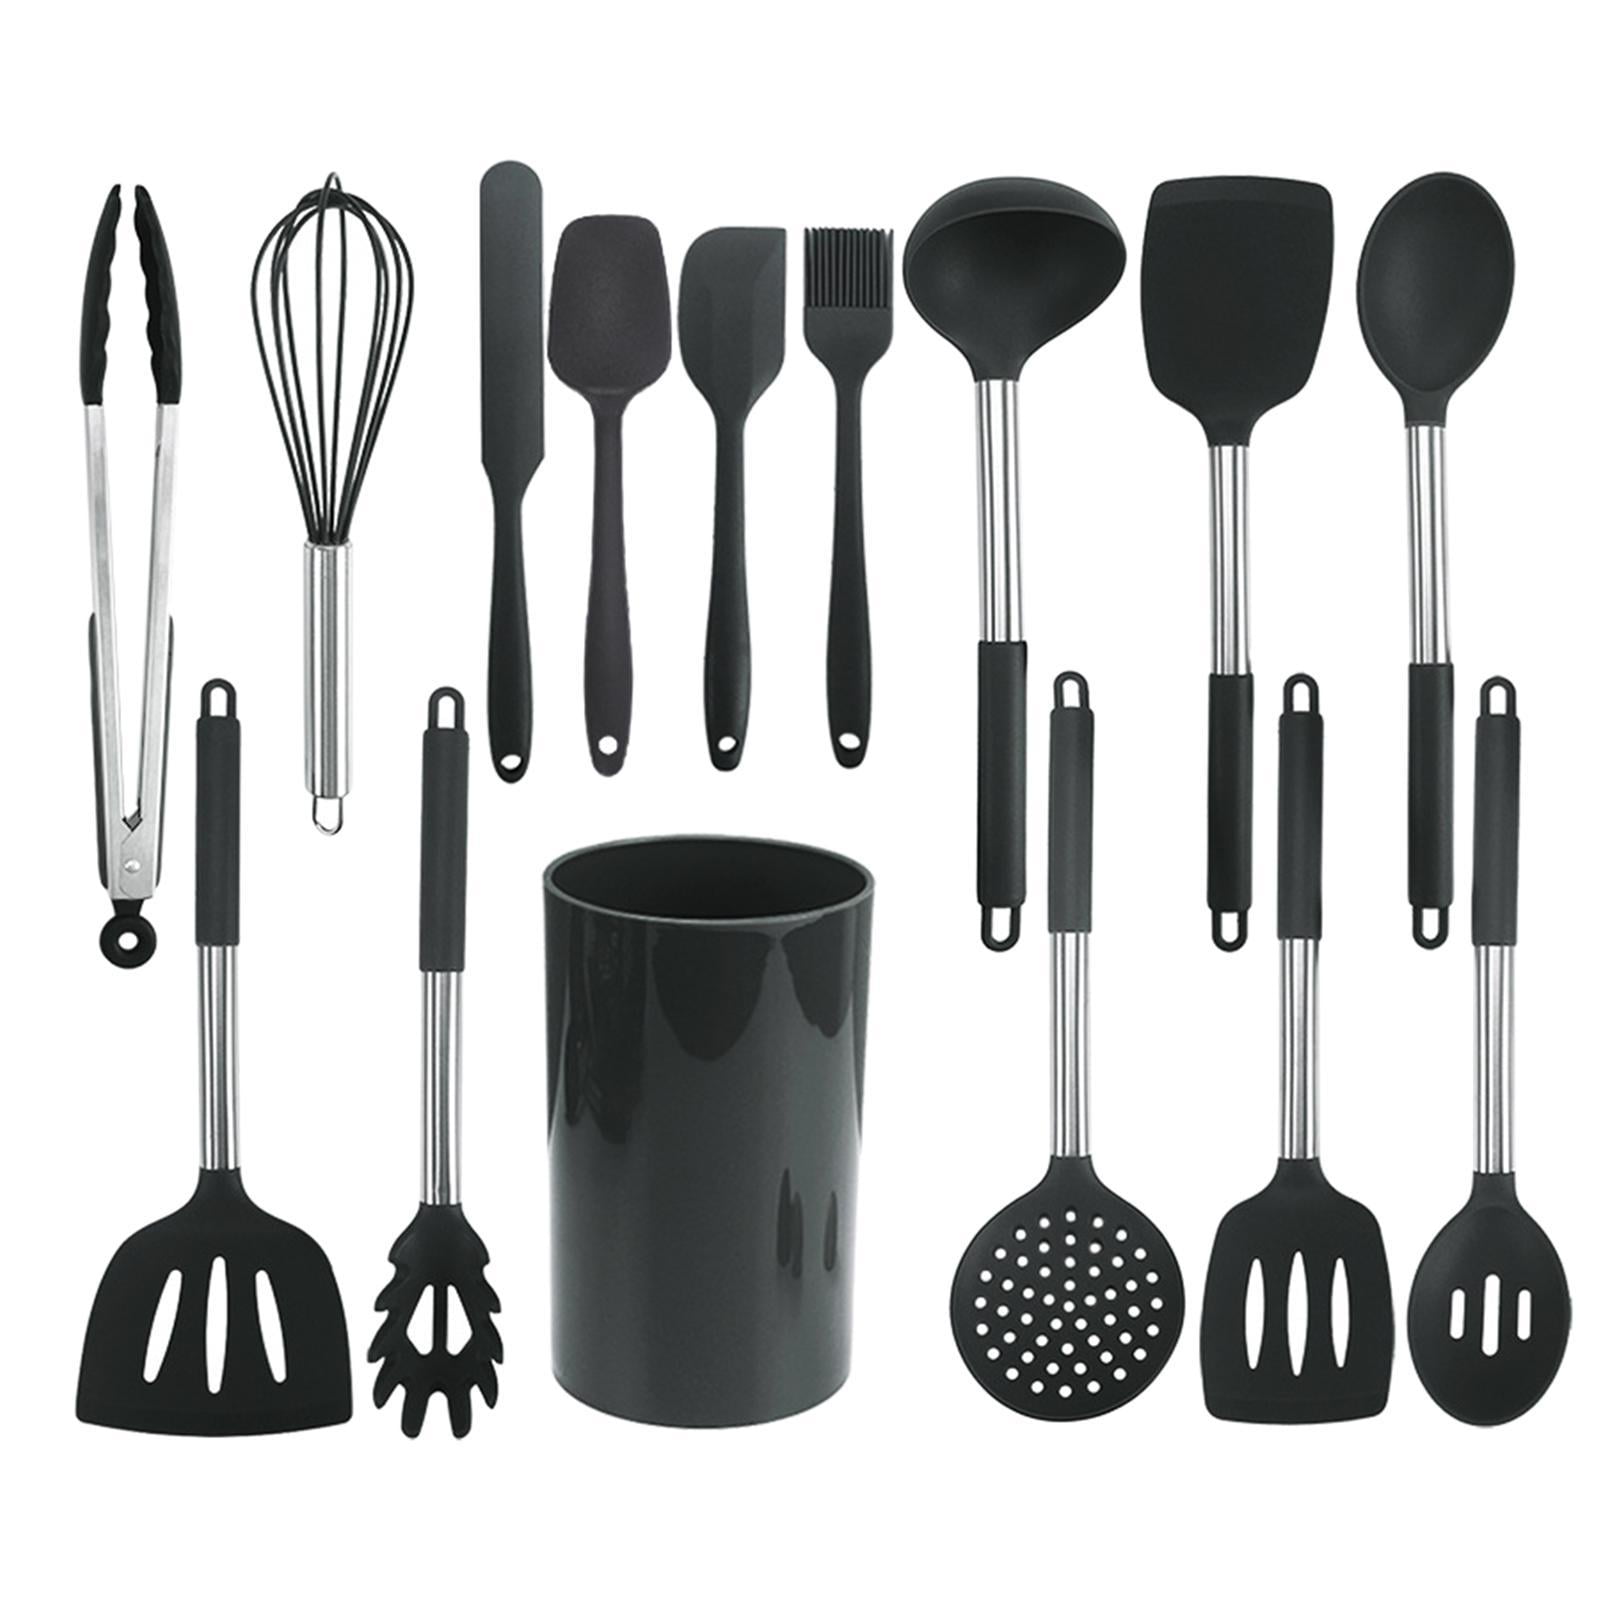 15x Stainless Steel Cooking Utensils Heat Resistant with Holder